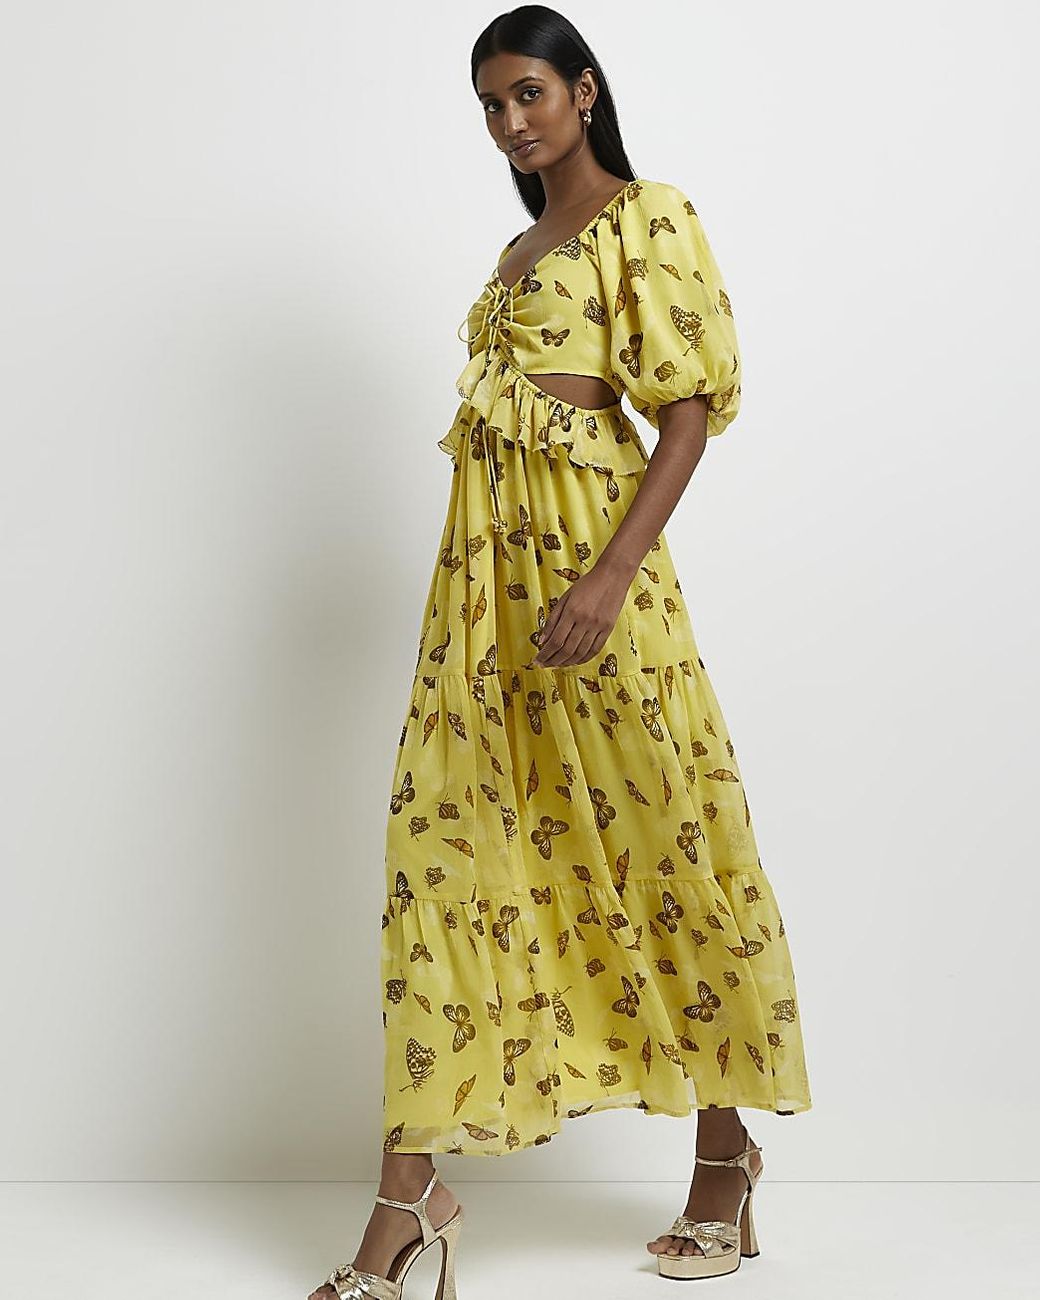 River Island Print Cut Out Maxi Dress in Yellow | Lyst